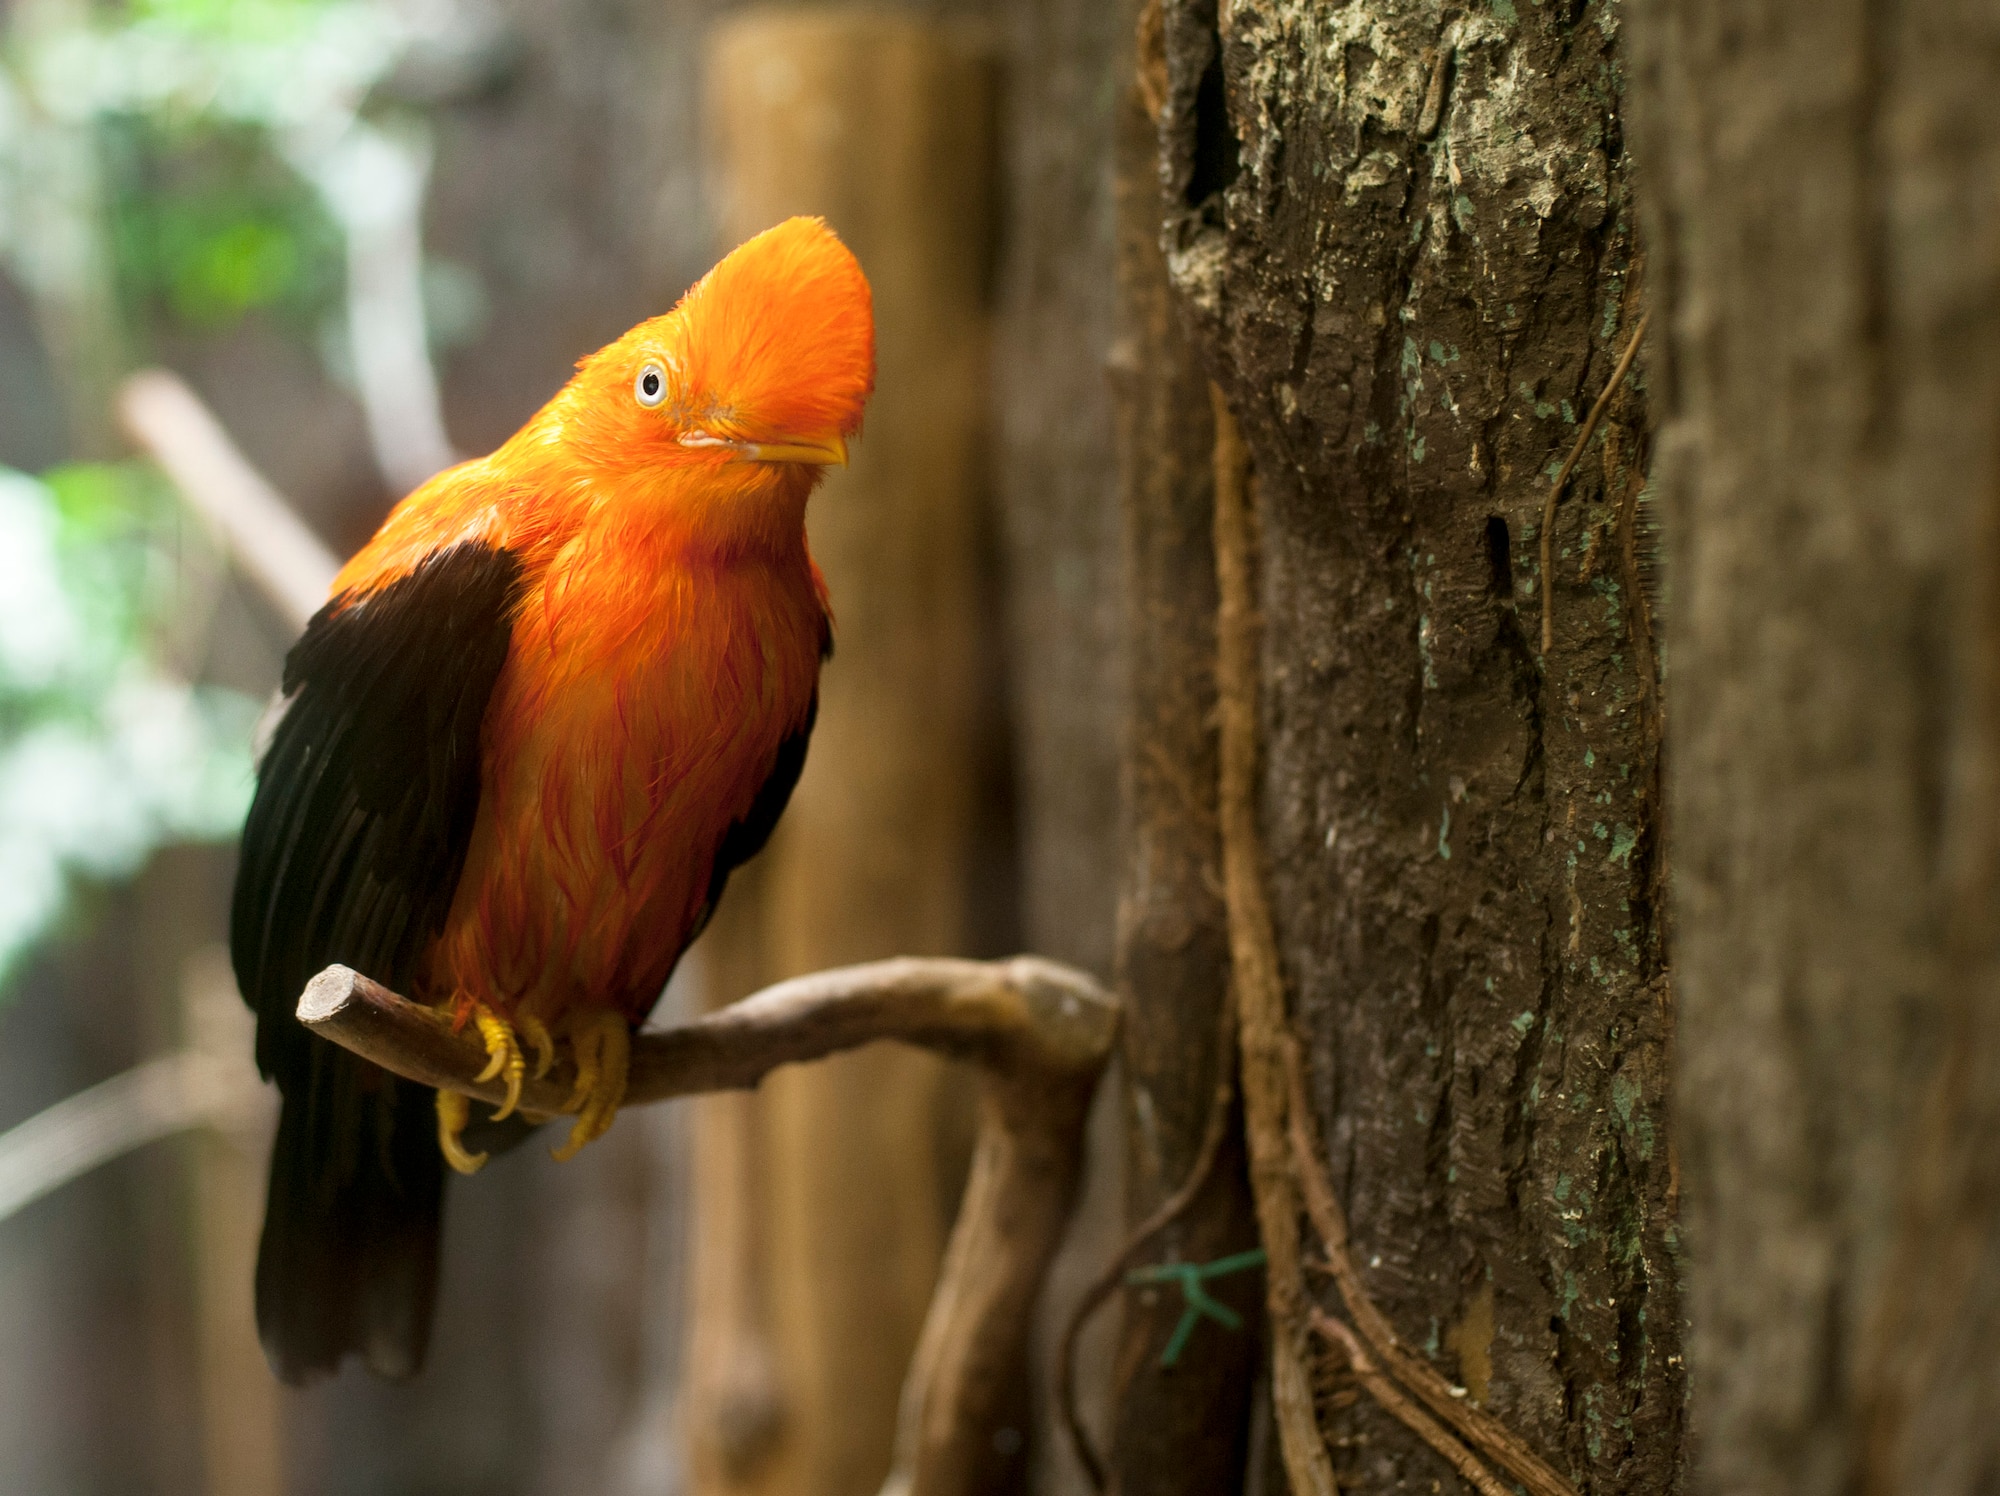 An Andean Cock-of-the-rock (Rupicola peruvianus) sits on a branch at Ueno Zoo Aug. 6, 2013. The Andean Cock-of-the-rock is Peru’s national bird and is native to South America. (U.S. Air Force photo by Senior Airman Michael Washburn)